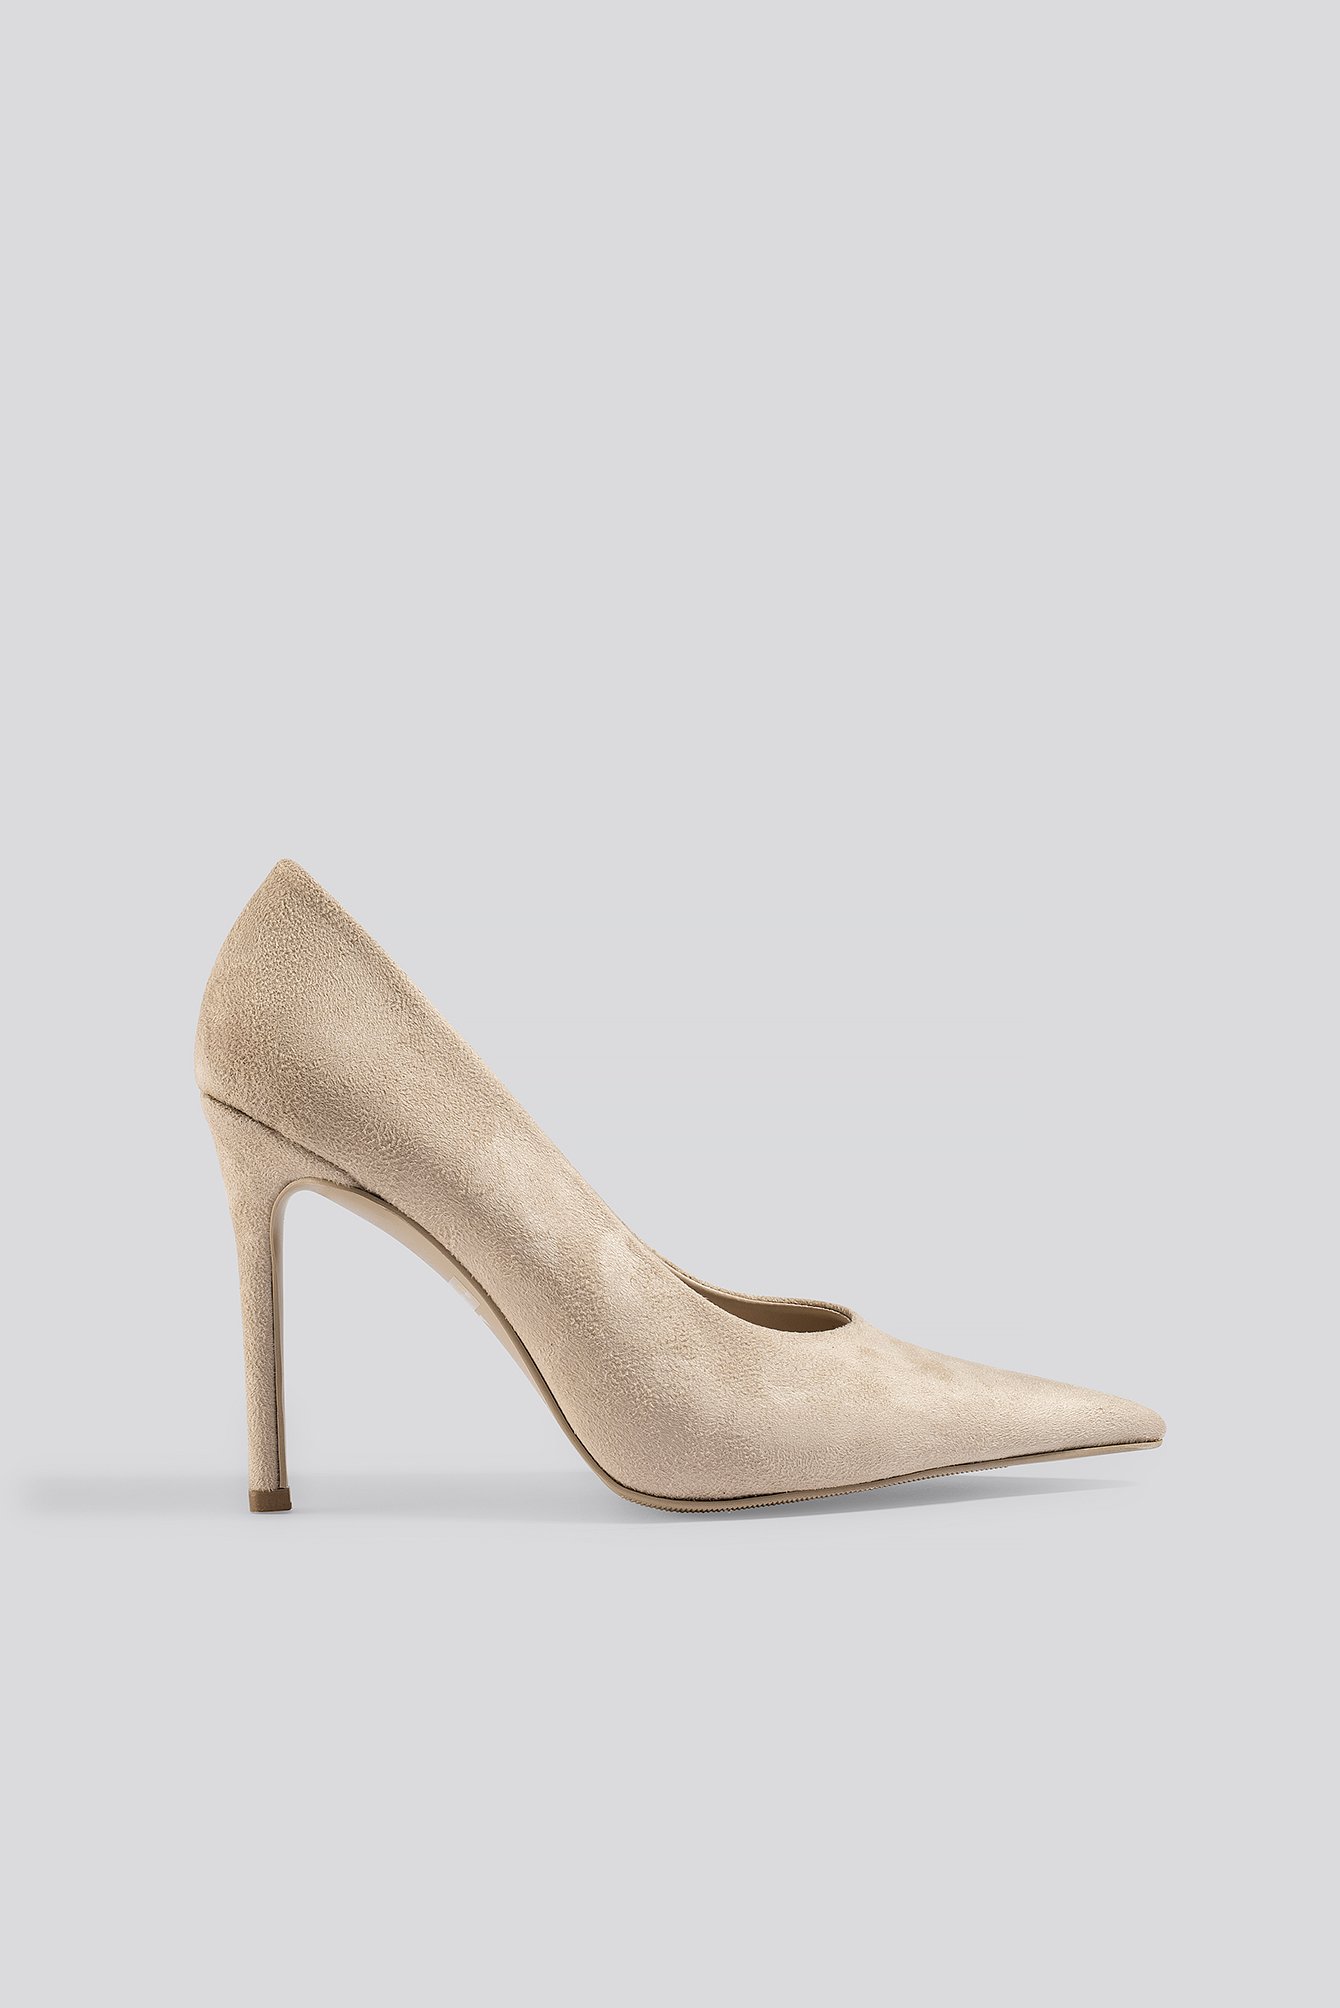 NA-KD Shoes Extreme Pointy Stiletto Pumps - Beige